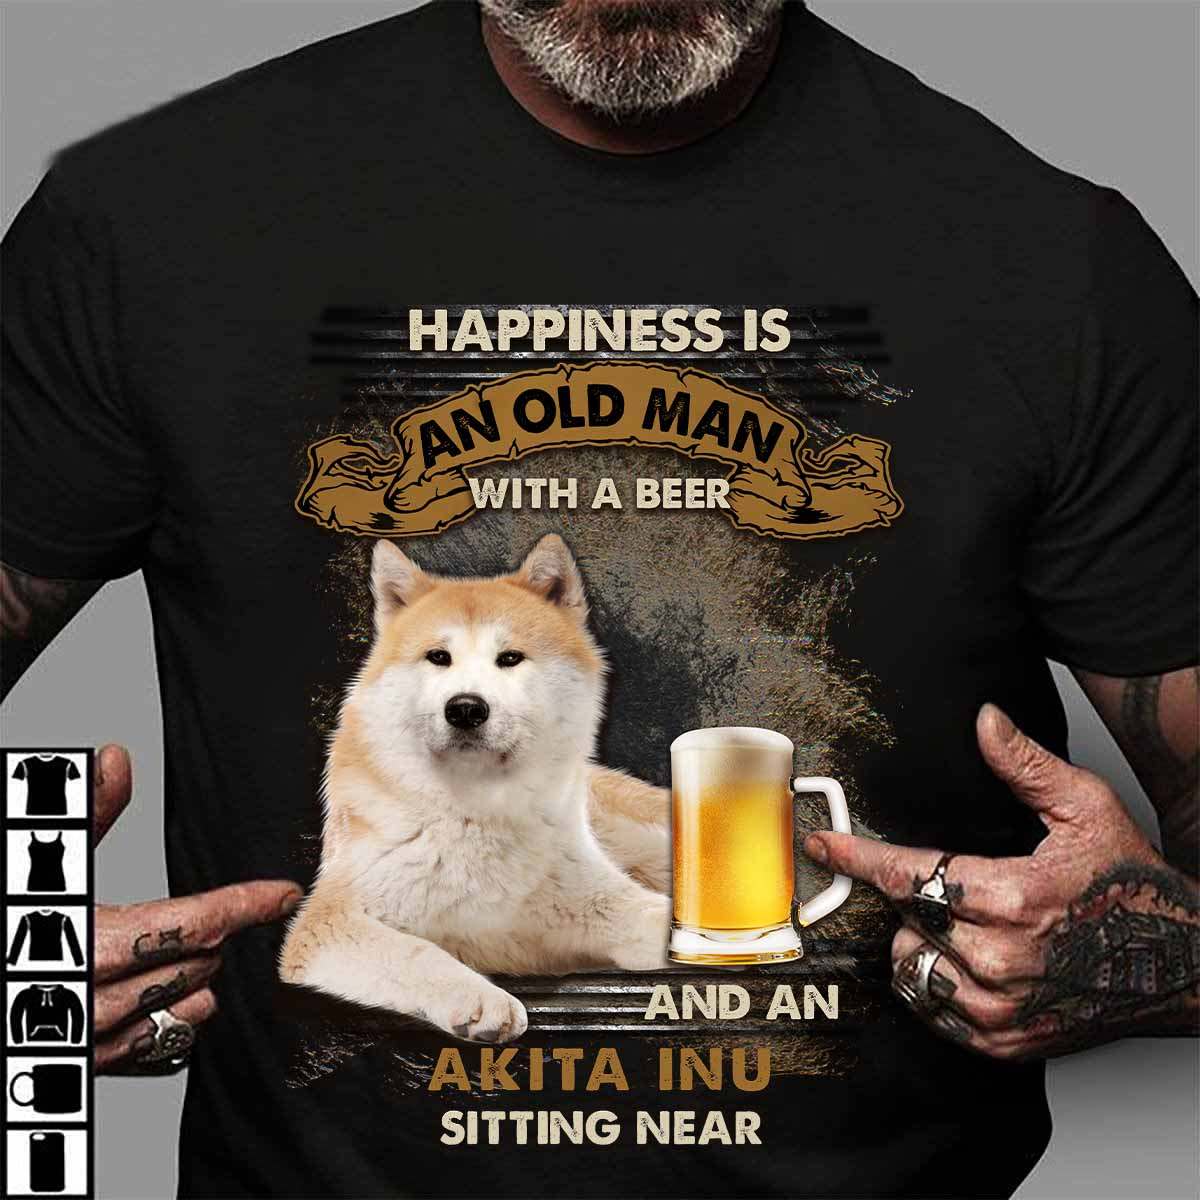 Happiness is an old man with a beer and an Akita Inu sitting near - Beer lover